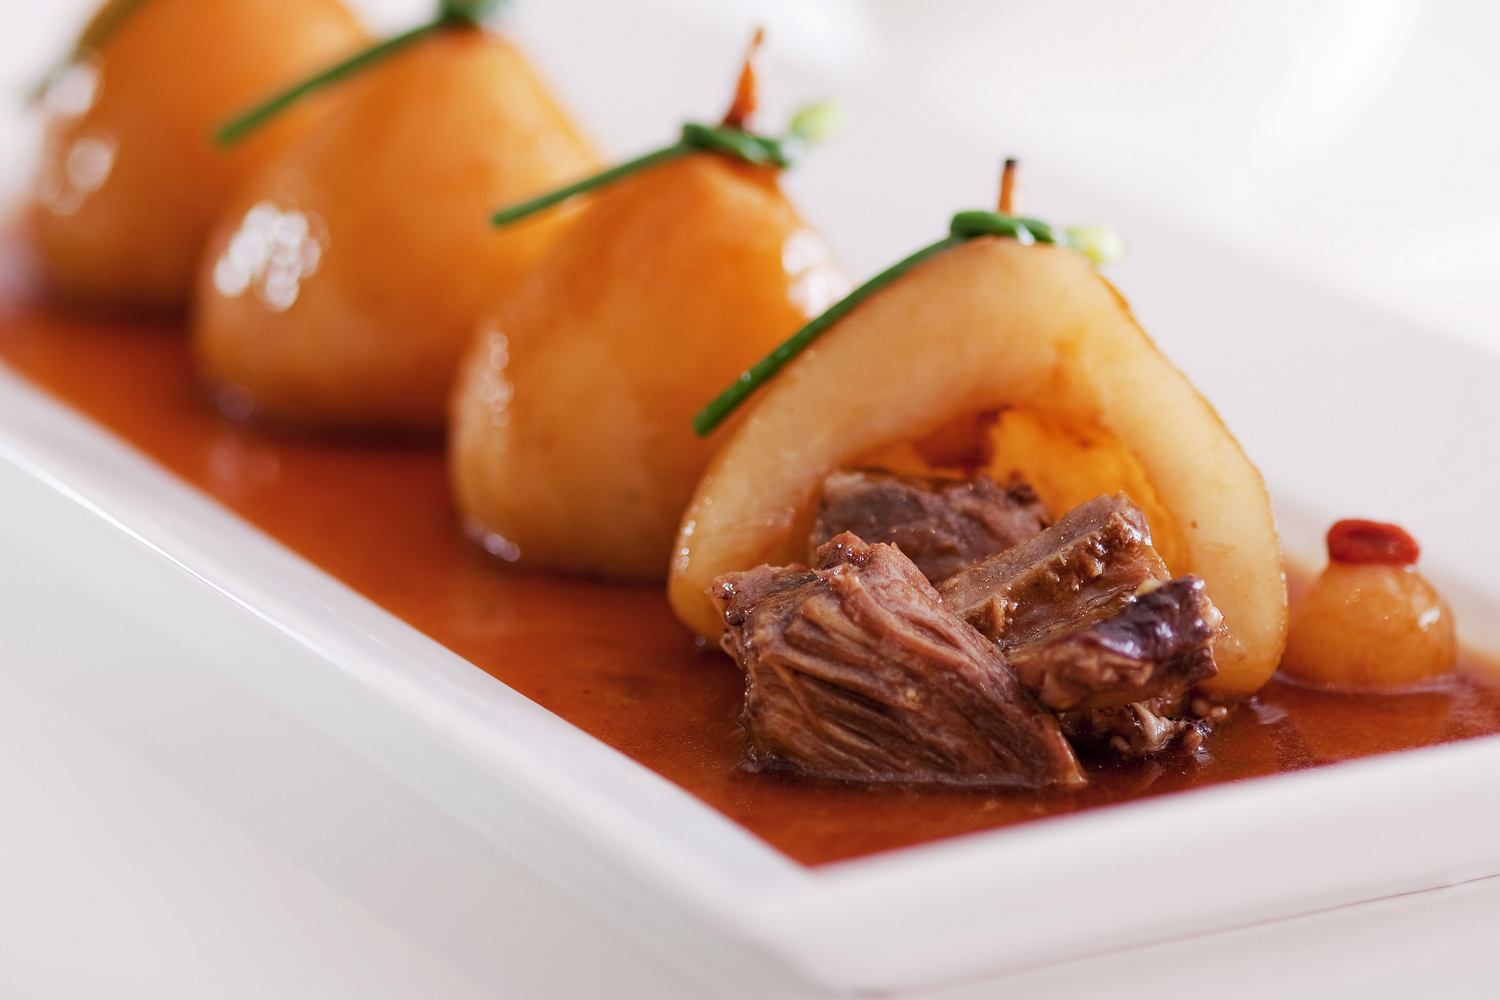 Hoi King Heen - Braised Crystal Pear Filled with Beef Brisket 海景軒 - 水晶牛肋肉_1500x1000